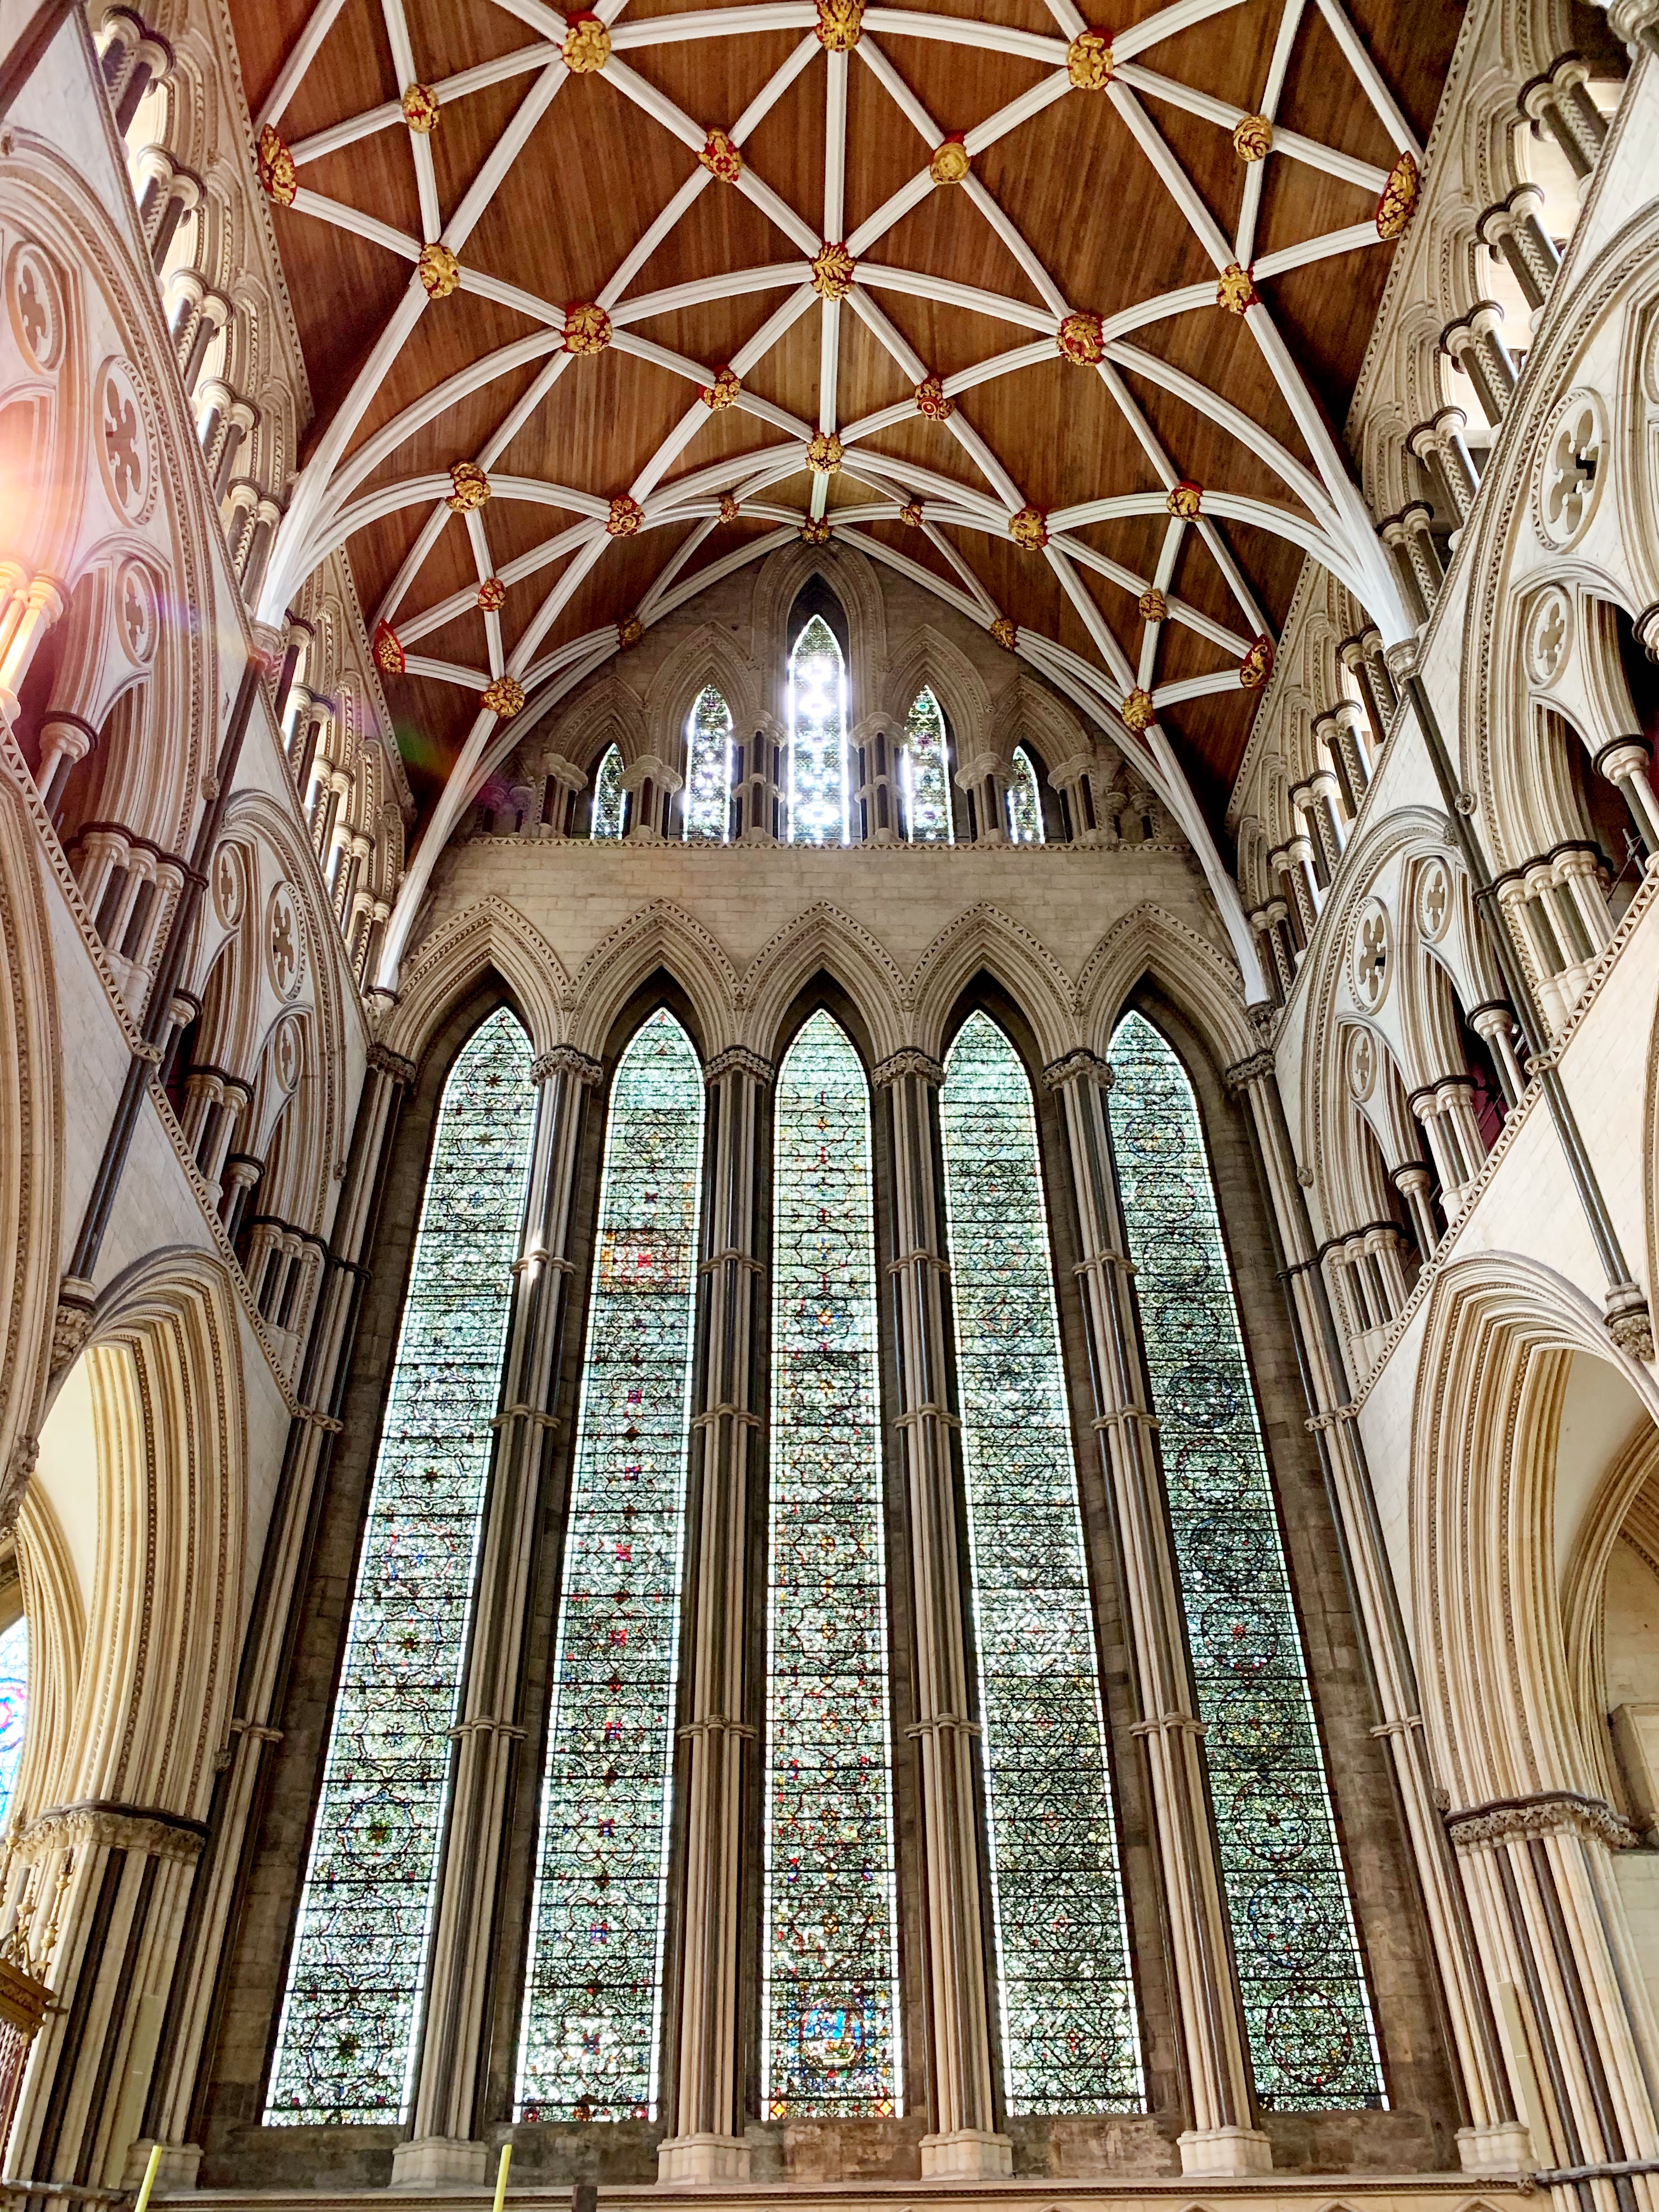 Intricate stained glass windows inside York Minster